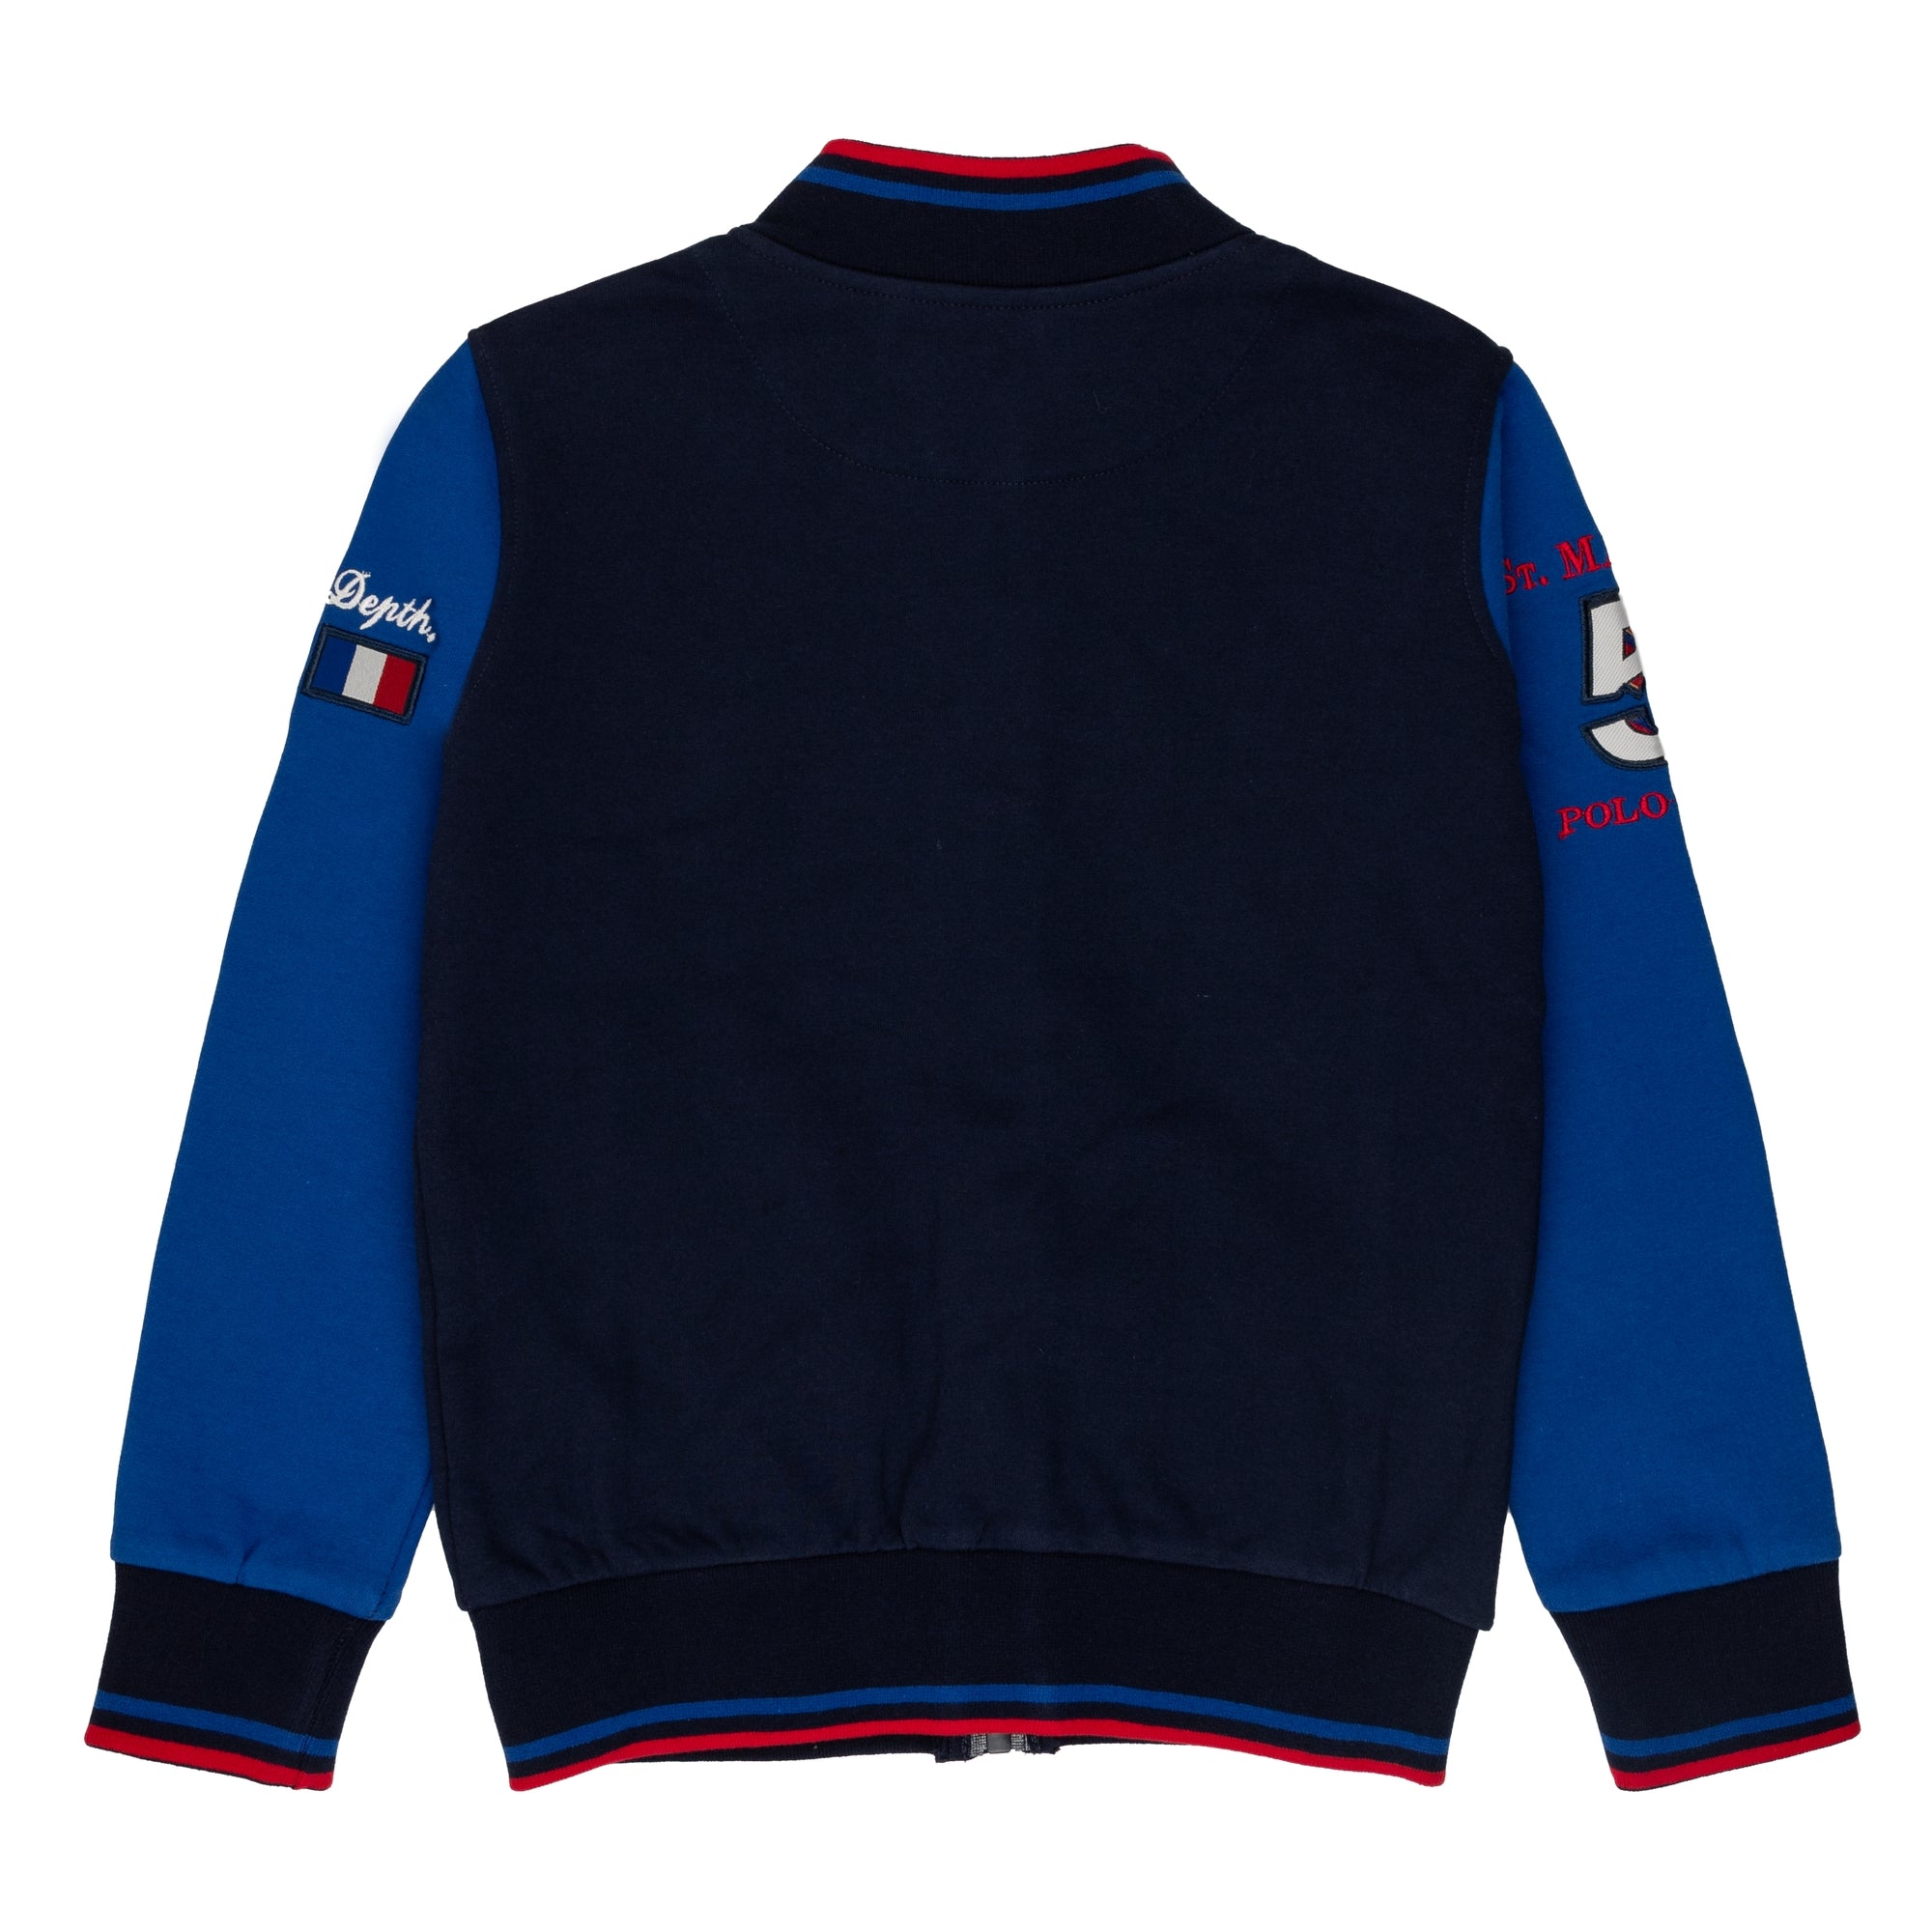 Sweatshirt with zip, contrasting sleeves and inside brushed embroidered logo